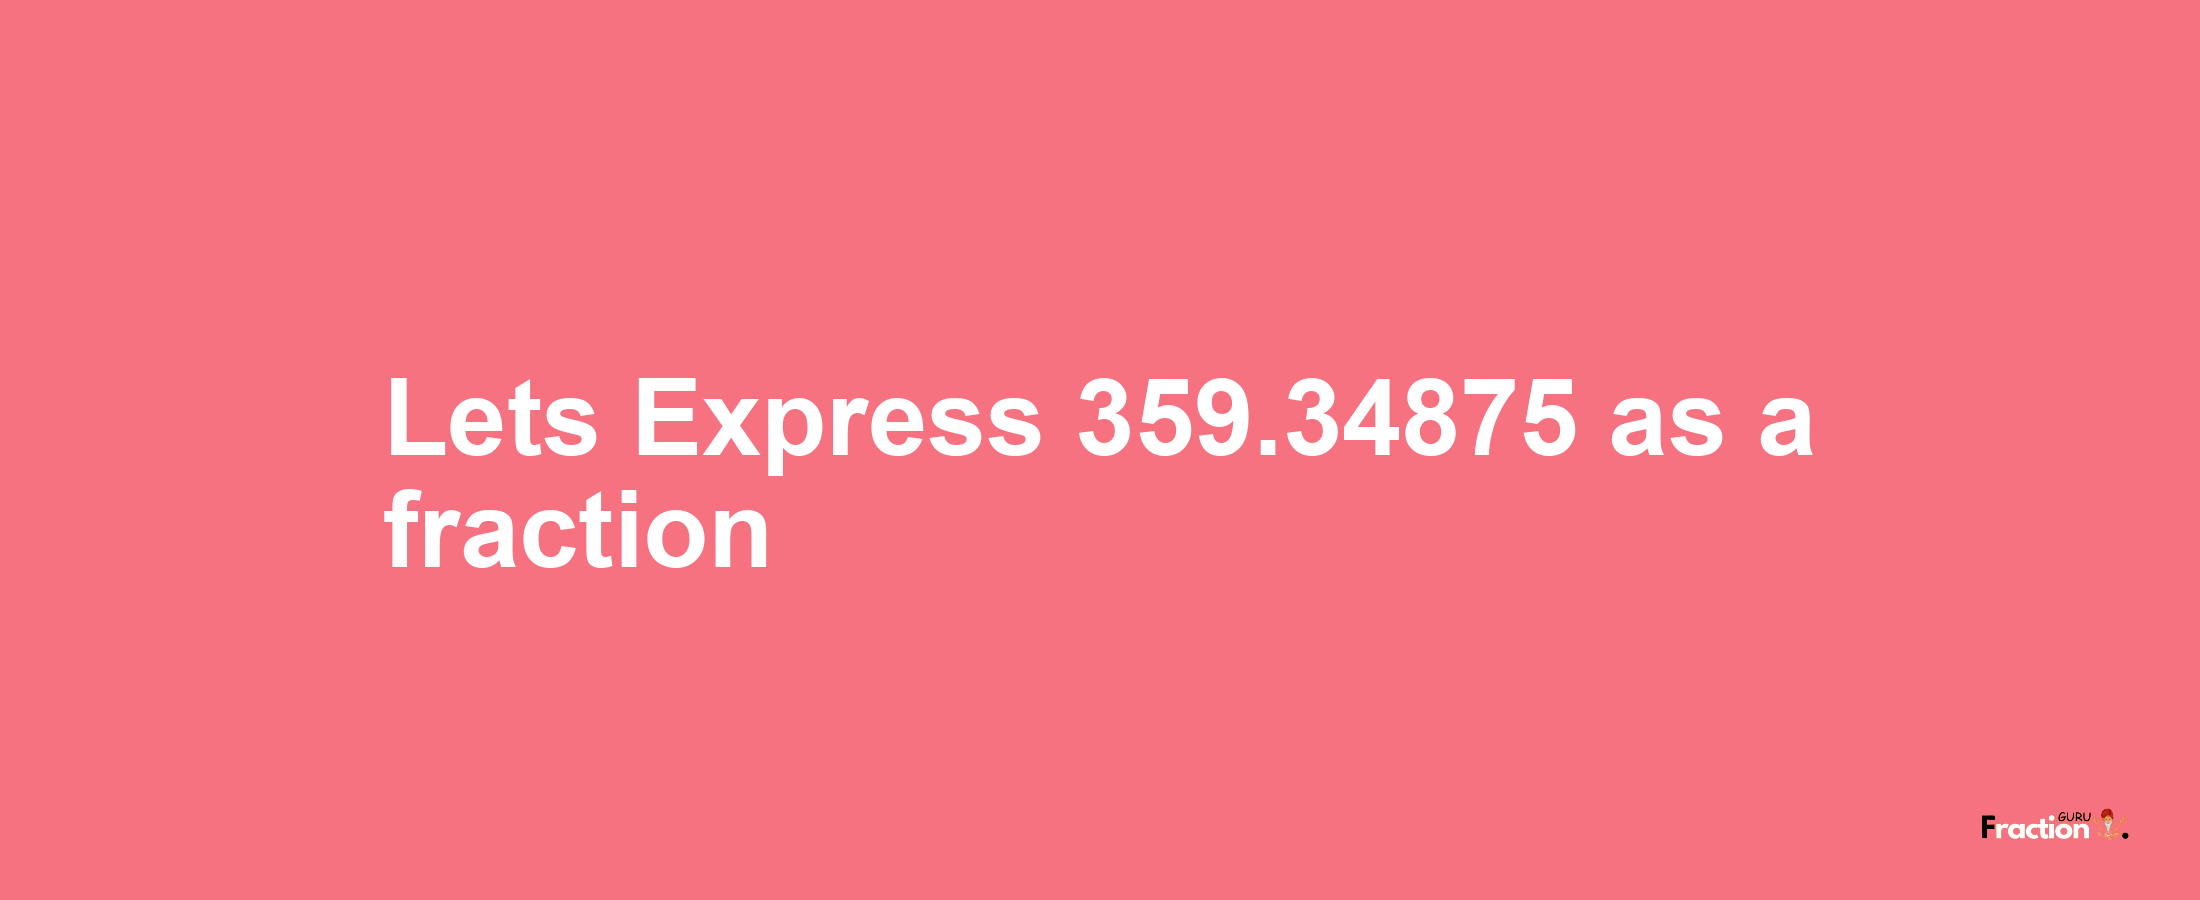 Lets Express 359.34875 as afraction